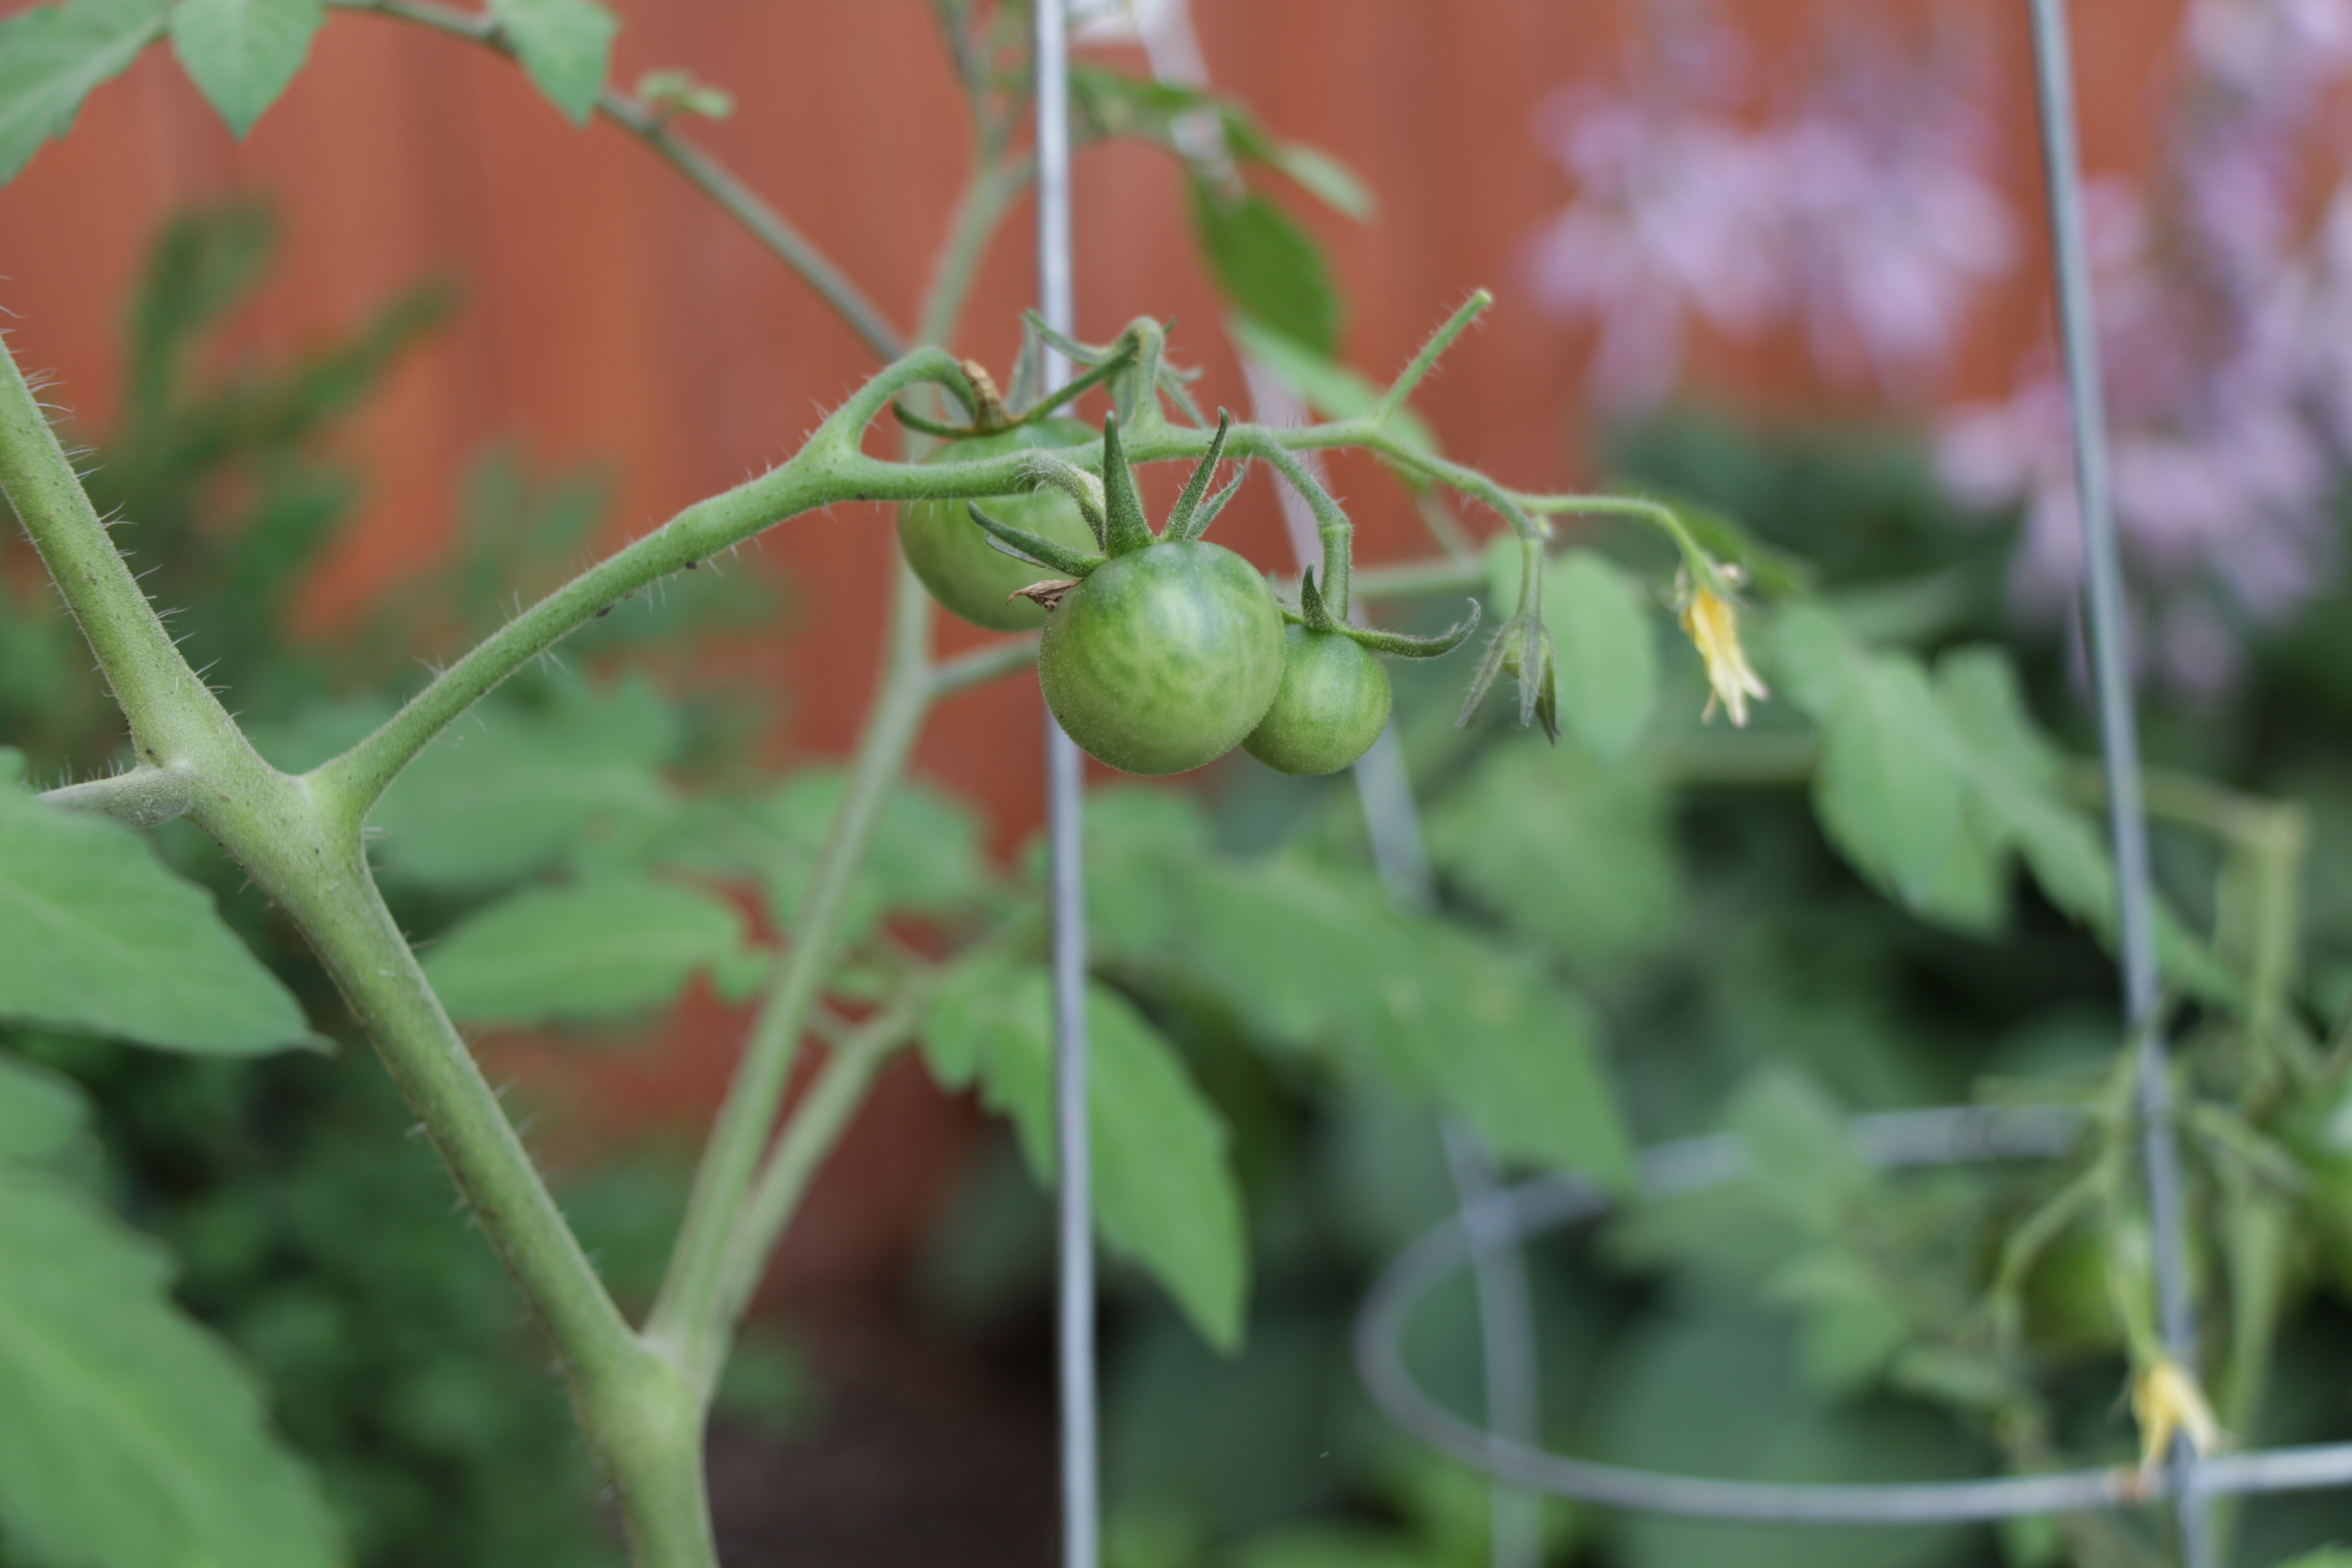 Young tomatoes in cages - Rule #1: give them proper support